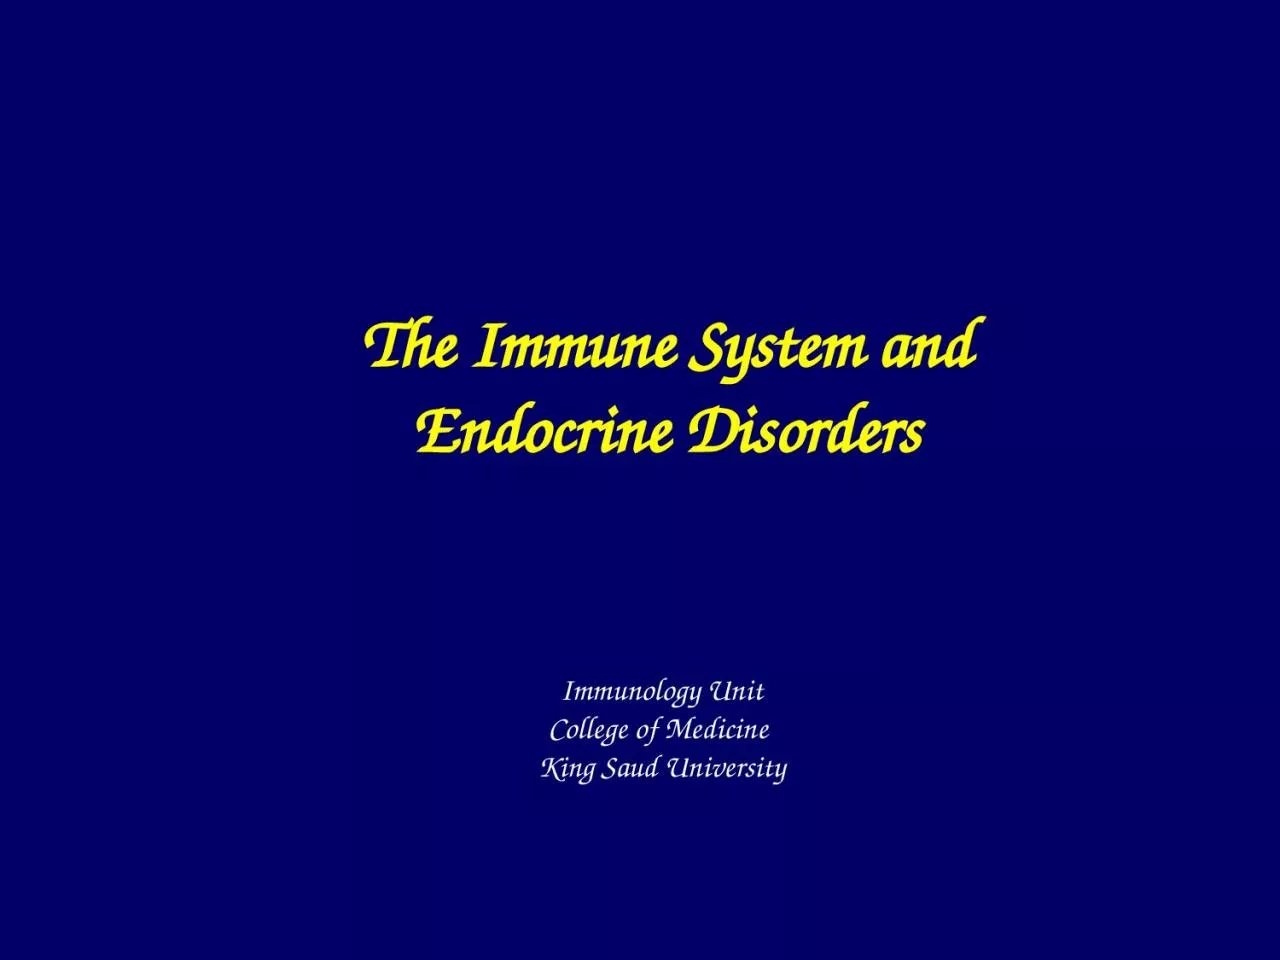 The Immune System and Endocrine Disorders